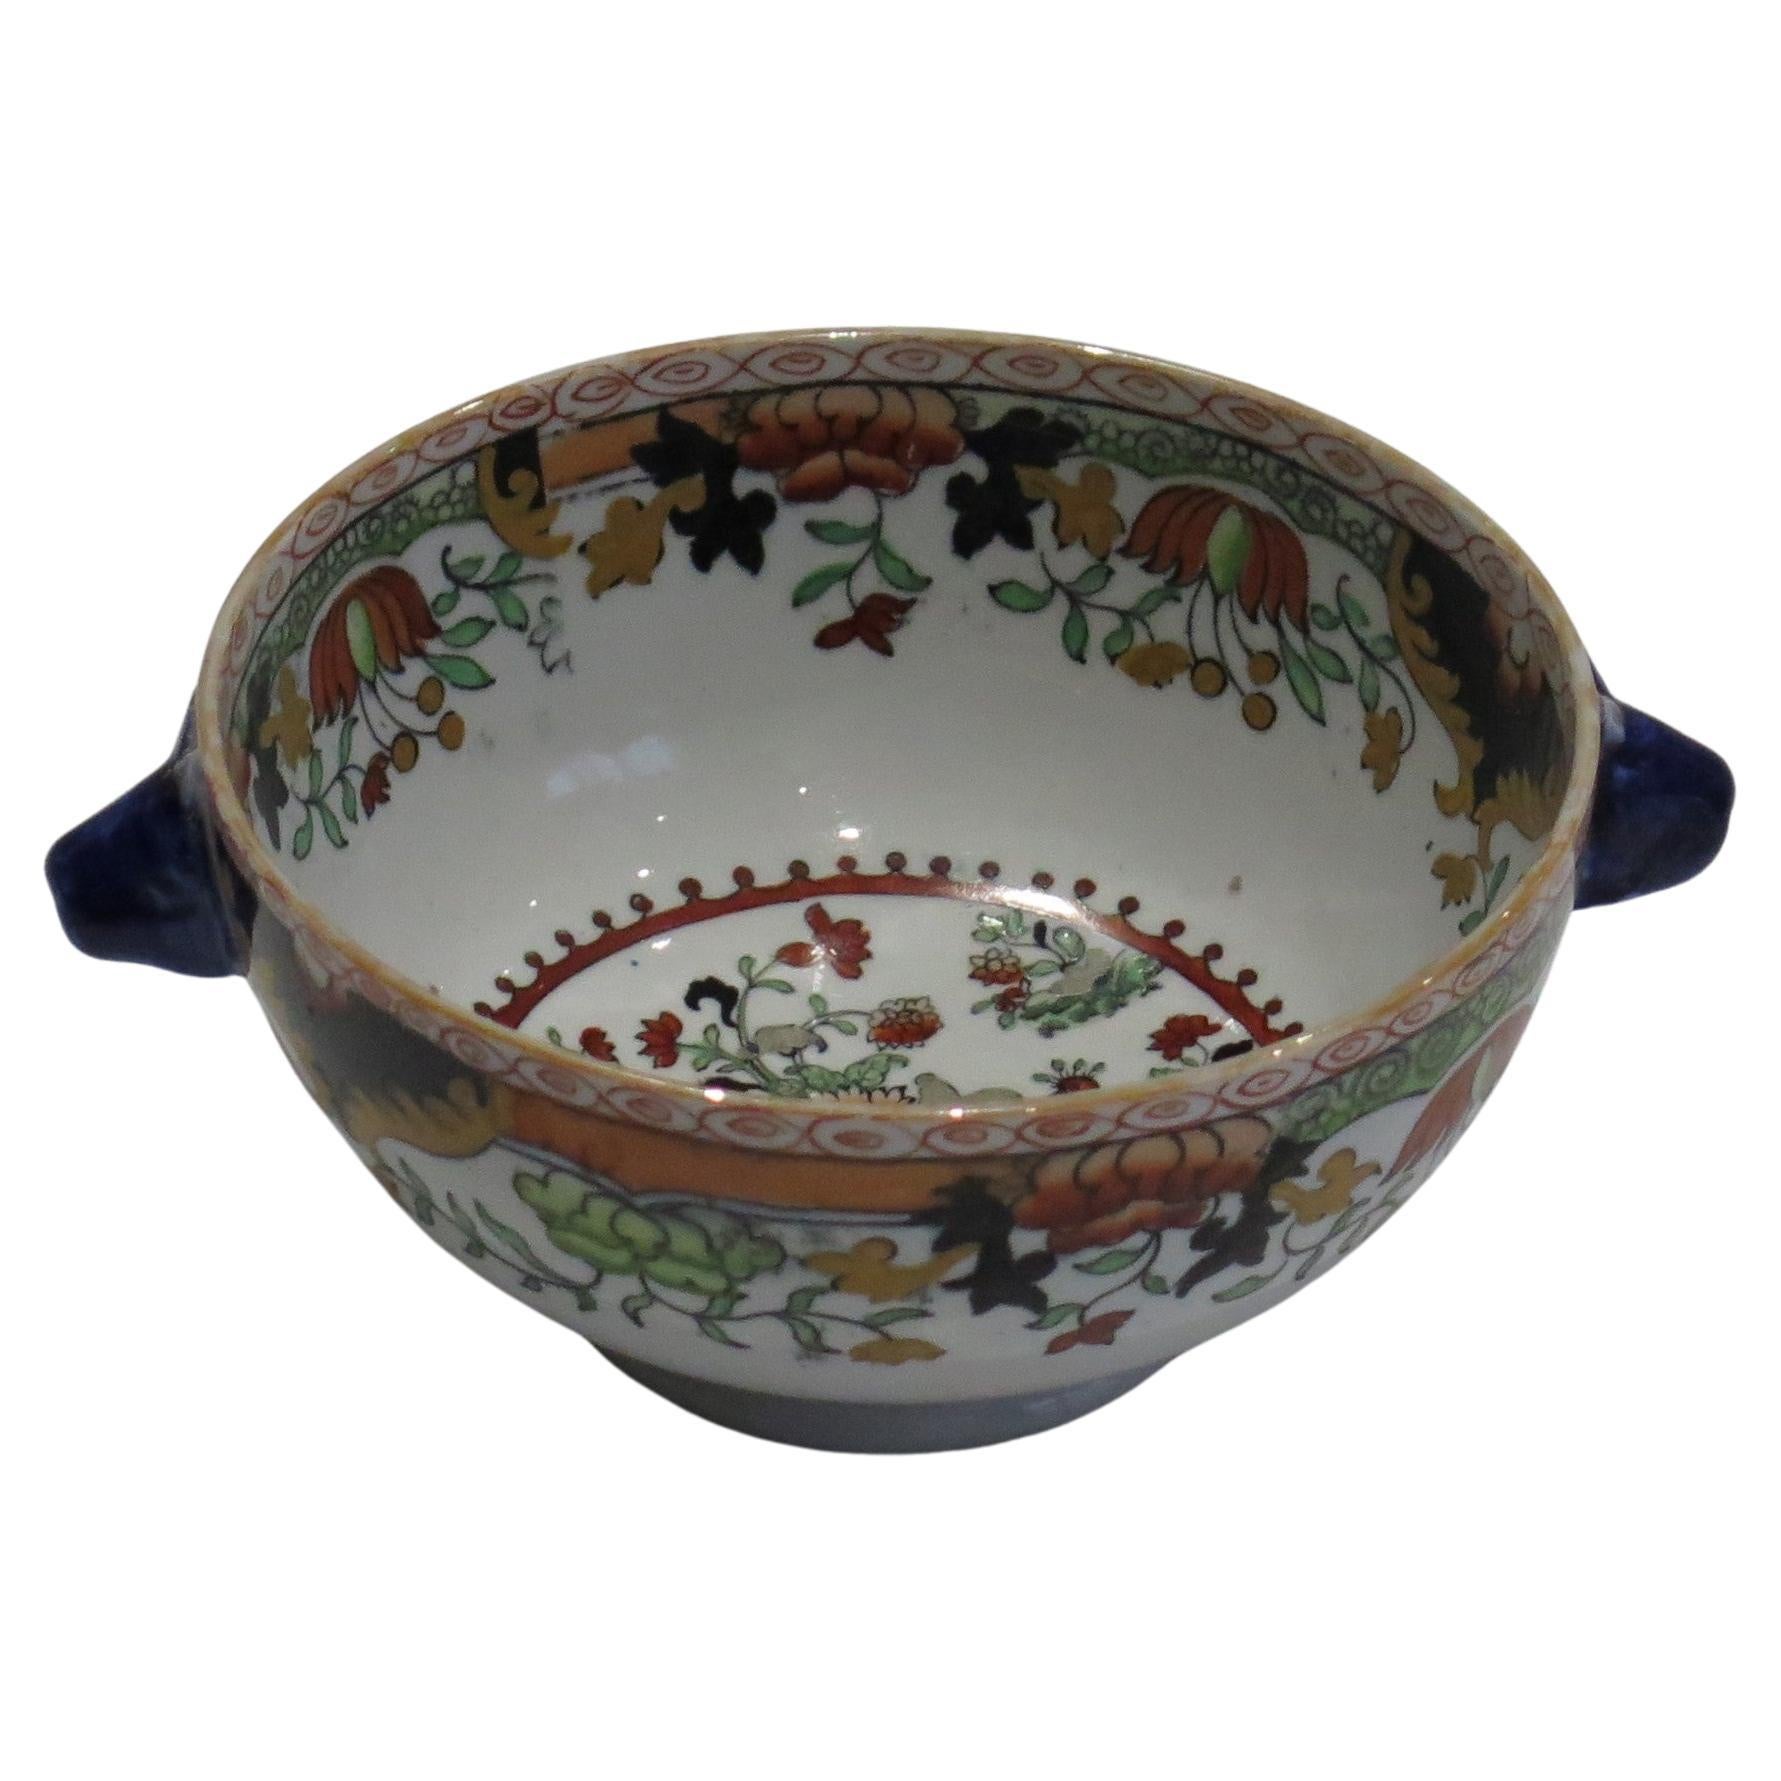 Masons Ironstone Bowl in Peacock Peony & Rock hand painted Pattern, circa 1838 For Sale